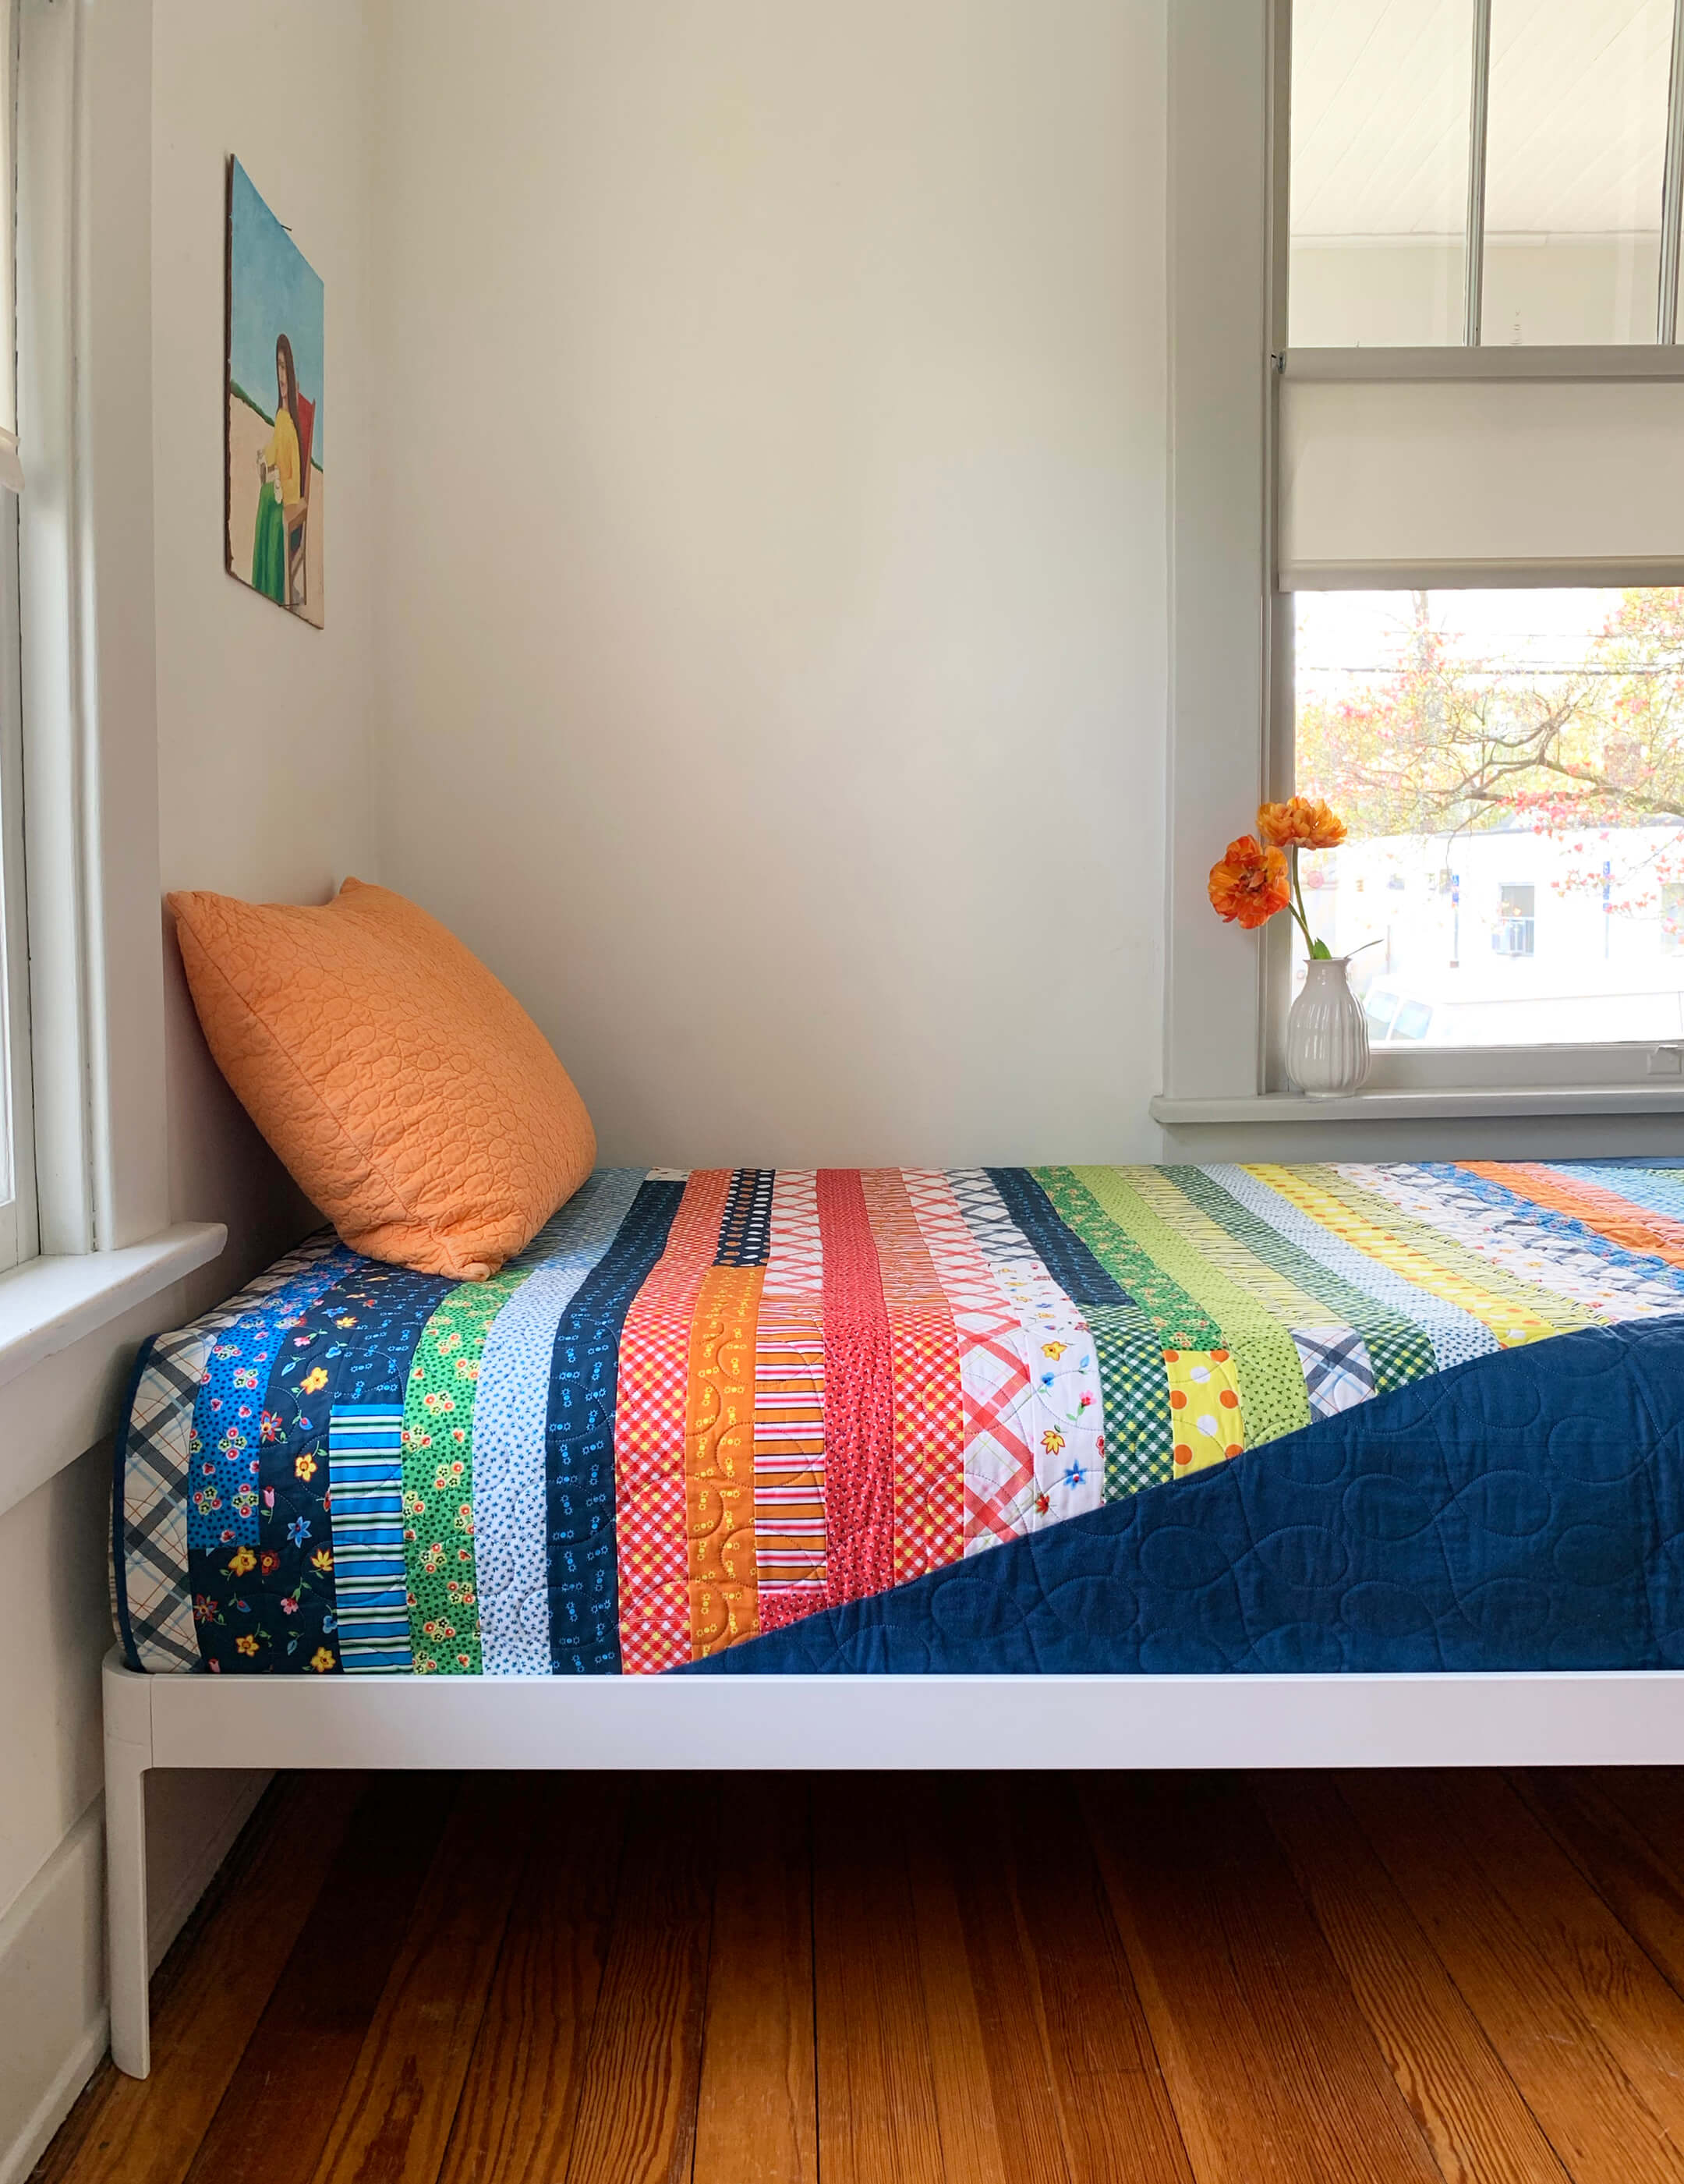 Big Tree -Side Bed with Quilt